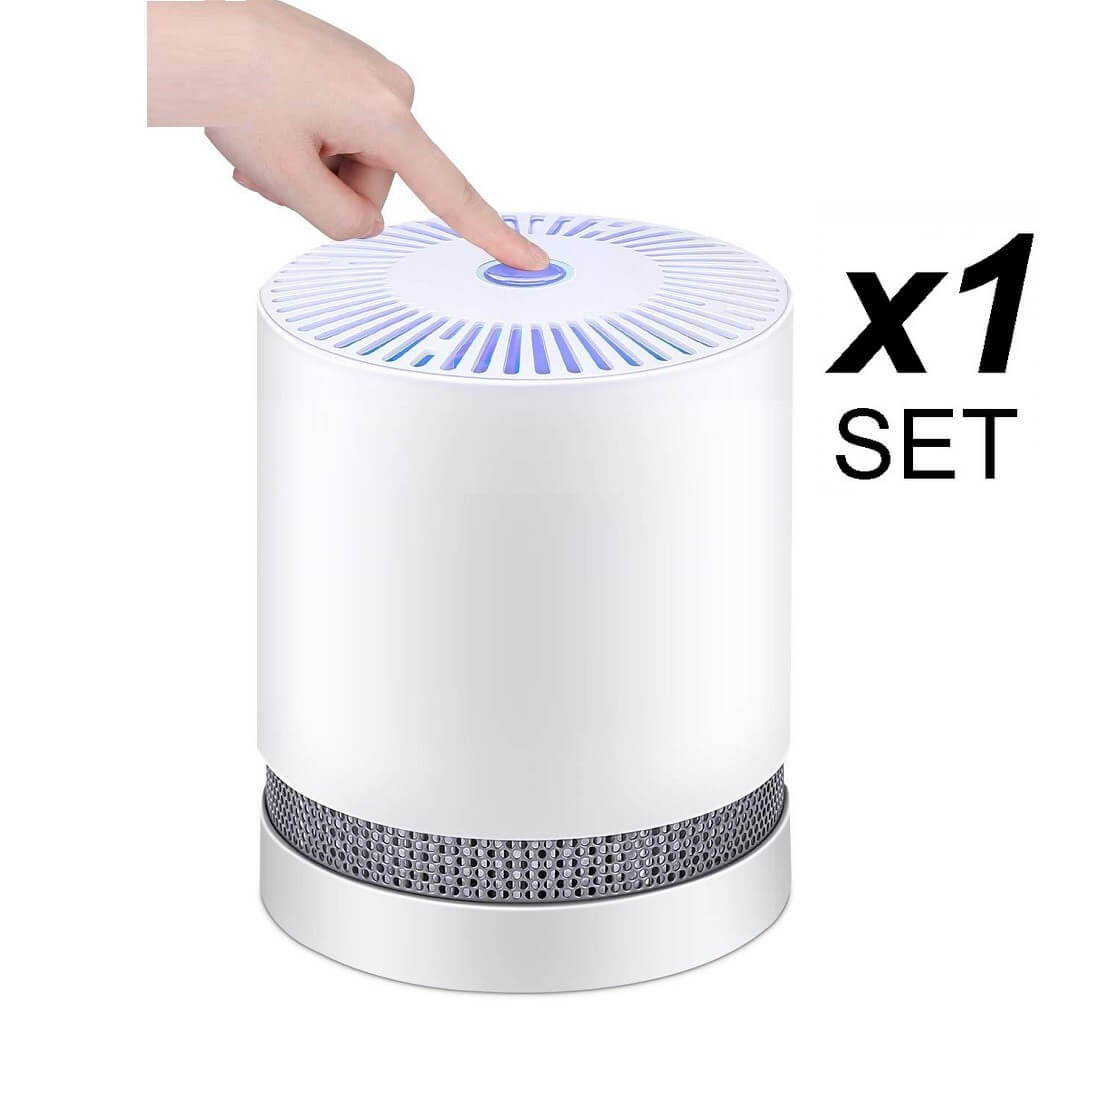 Compact Air Purifier for Home, Bedroom